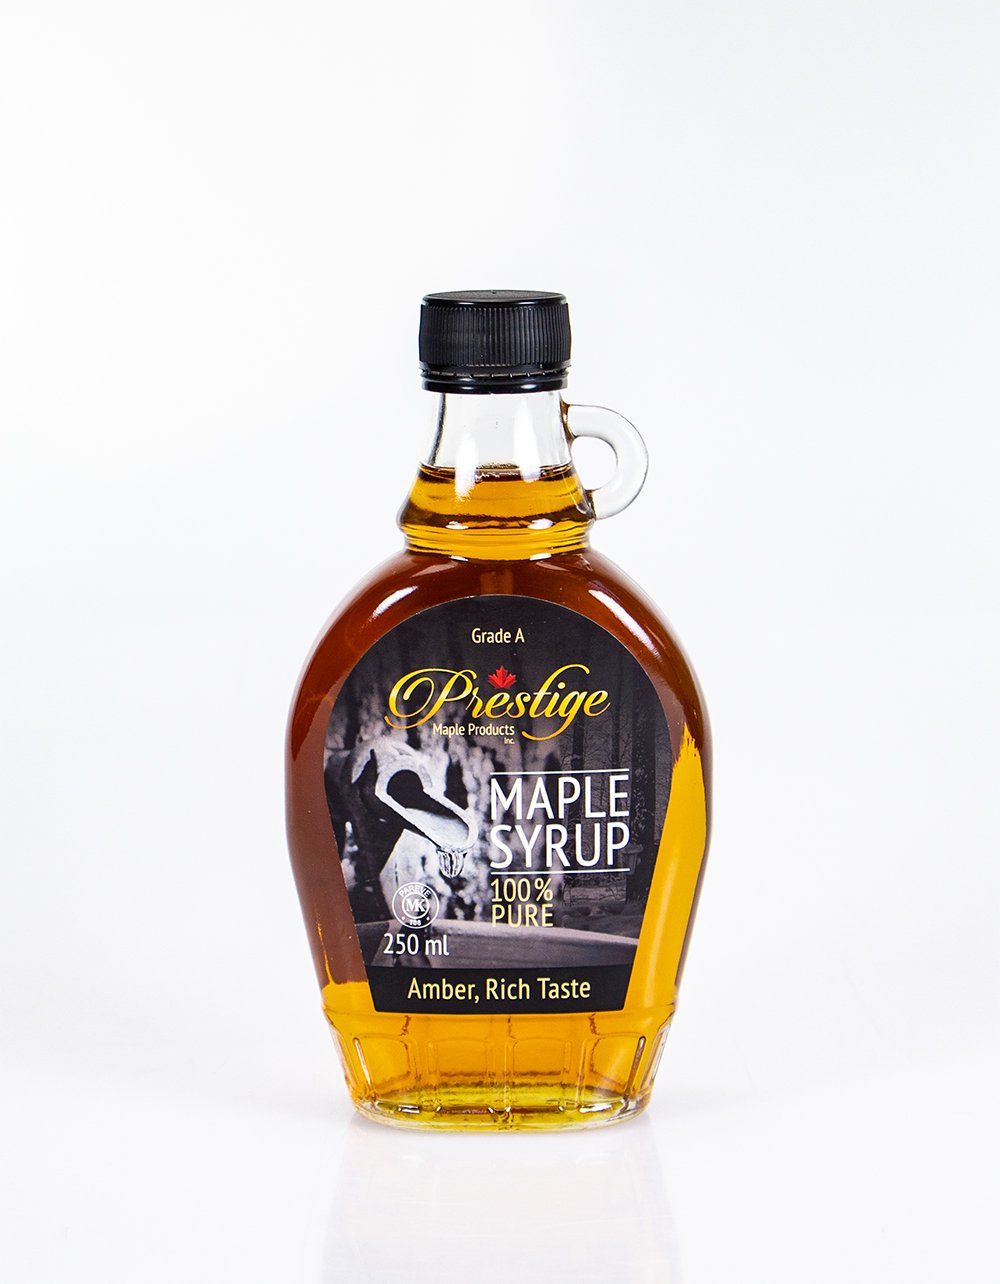 MULTI-BUY SPECIAL Candian Pure Maple Syrup 4 x 250ml